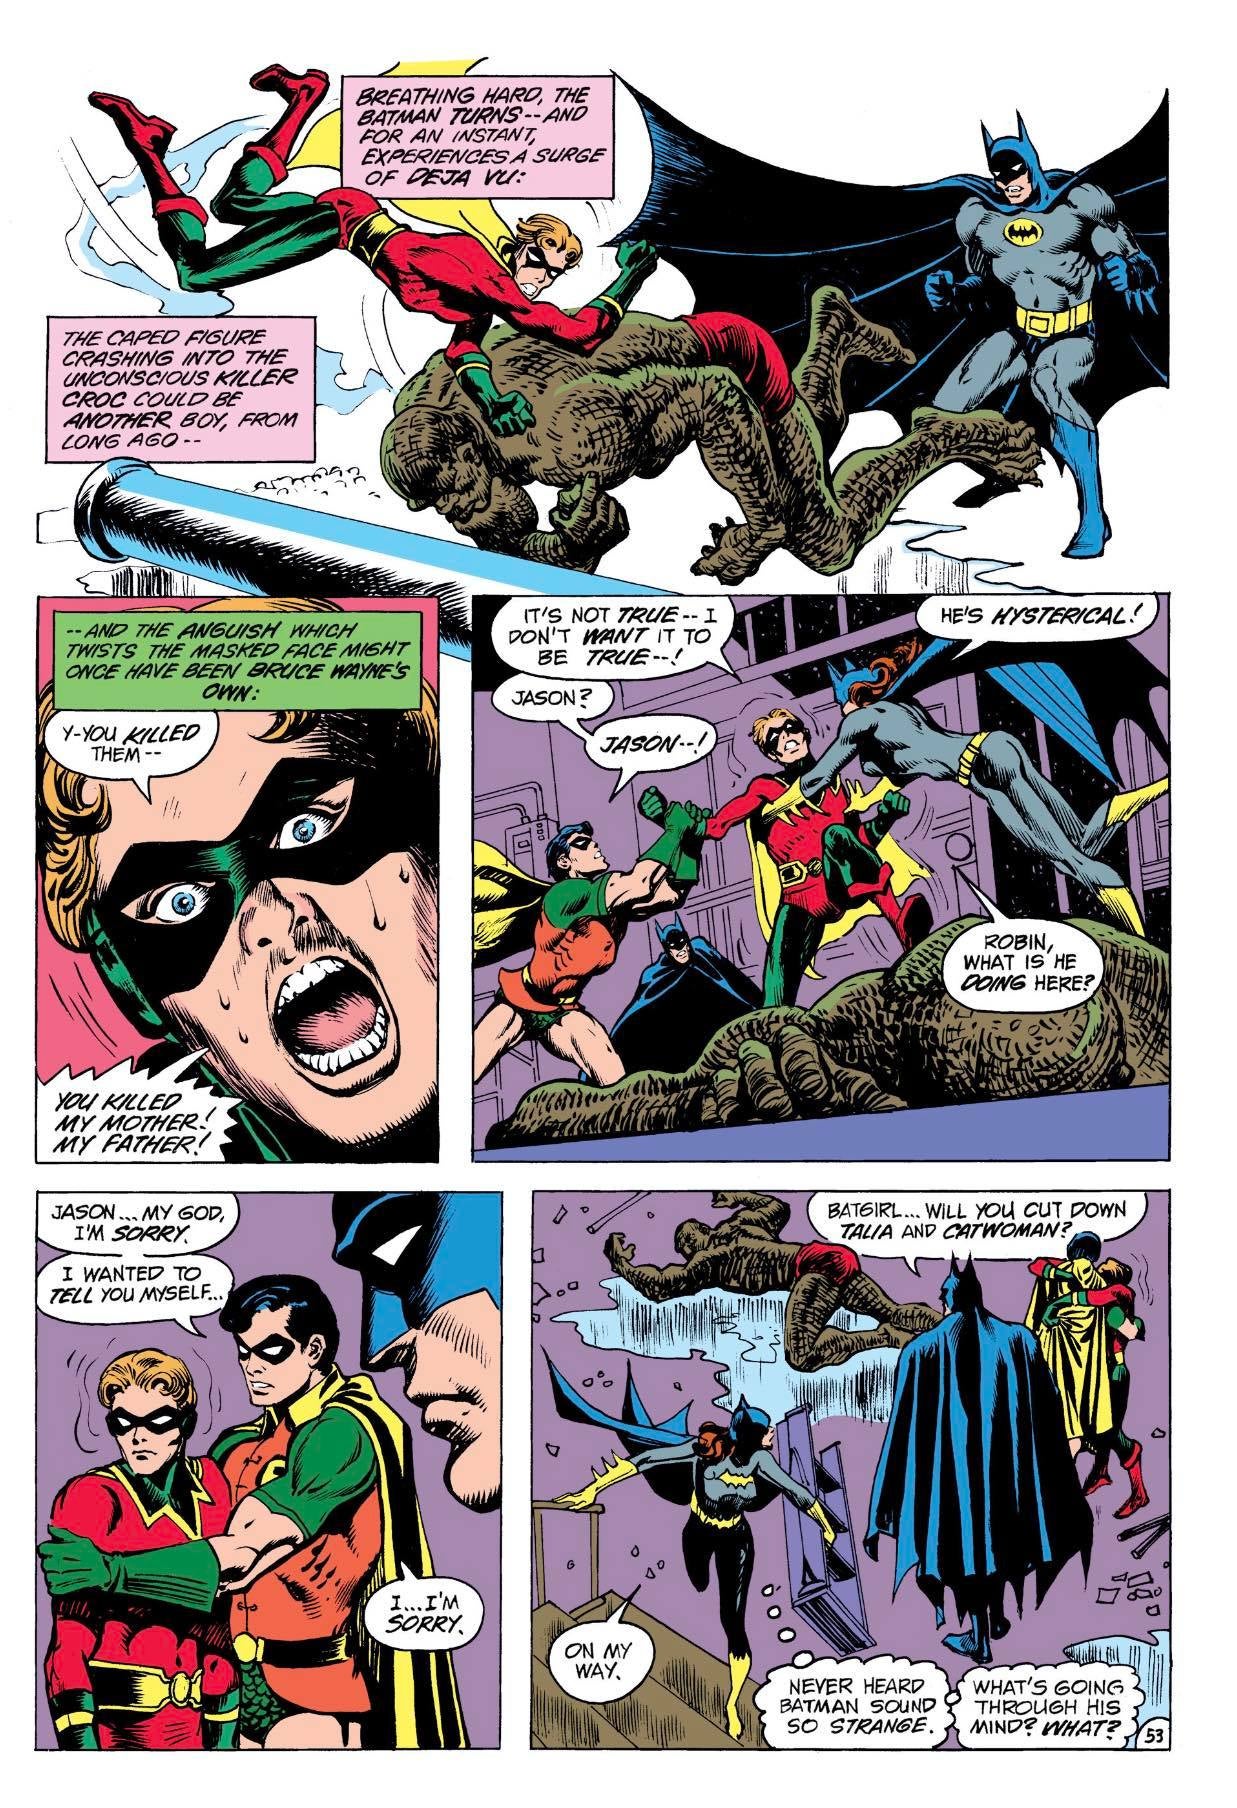 Jason Todd discovers that Killer Croc murdered his parents (art by Don Newton)